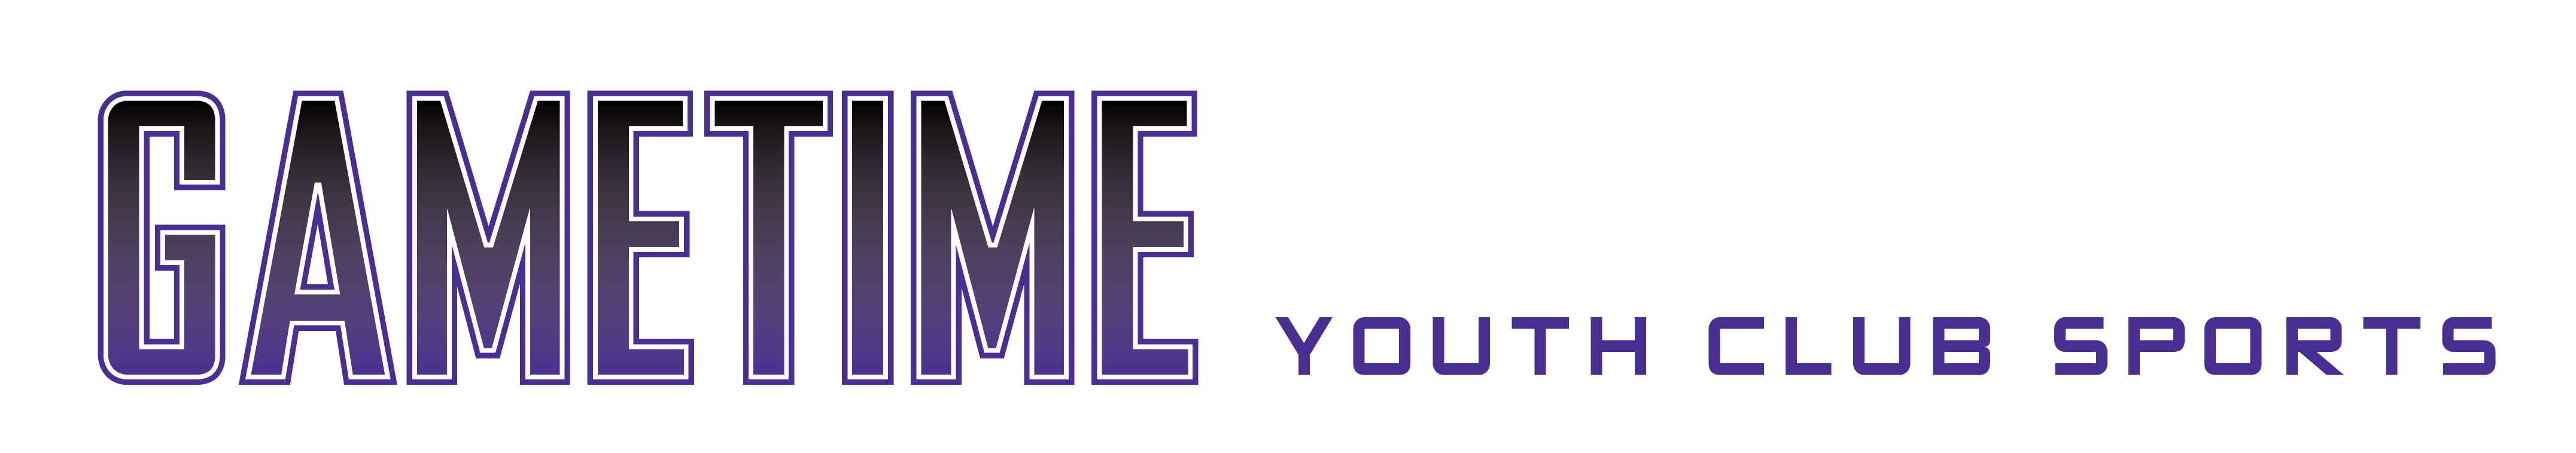 GameTime-Academy-Banner_png